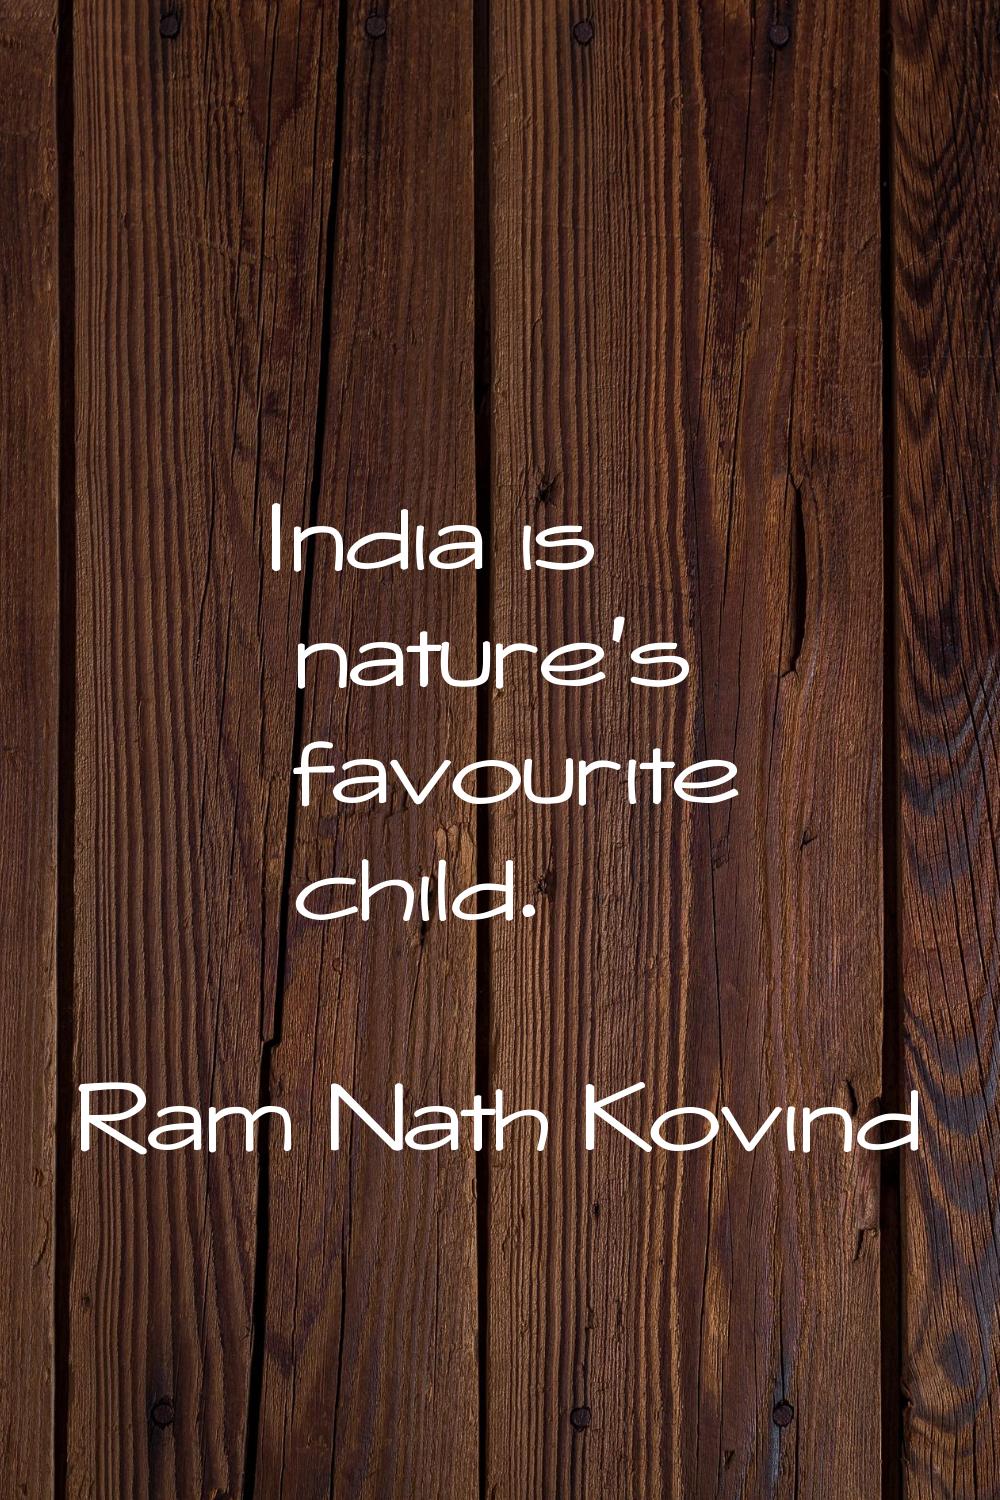 India is nature's favourite child.